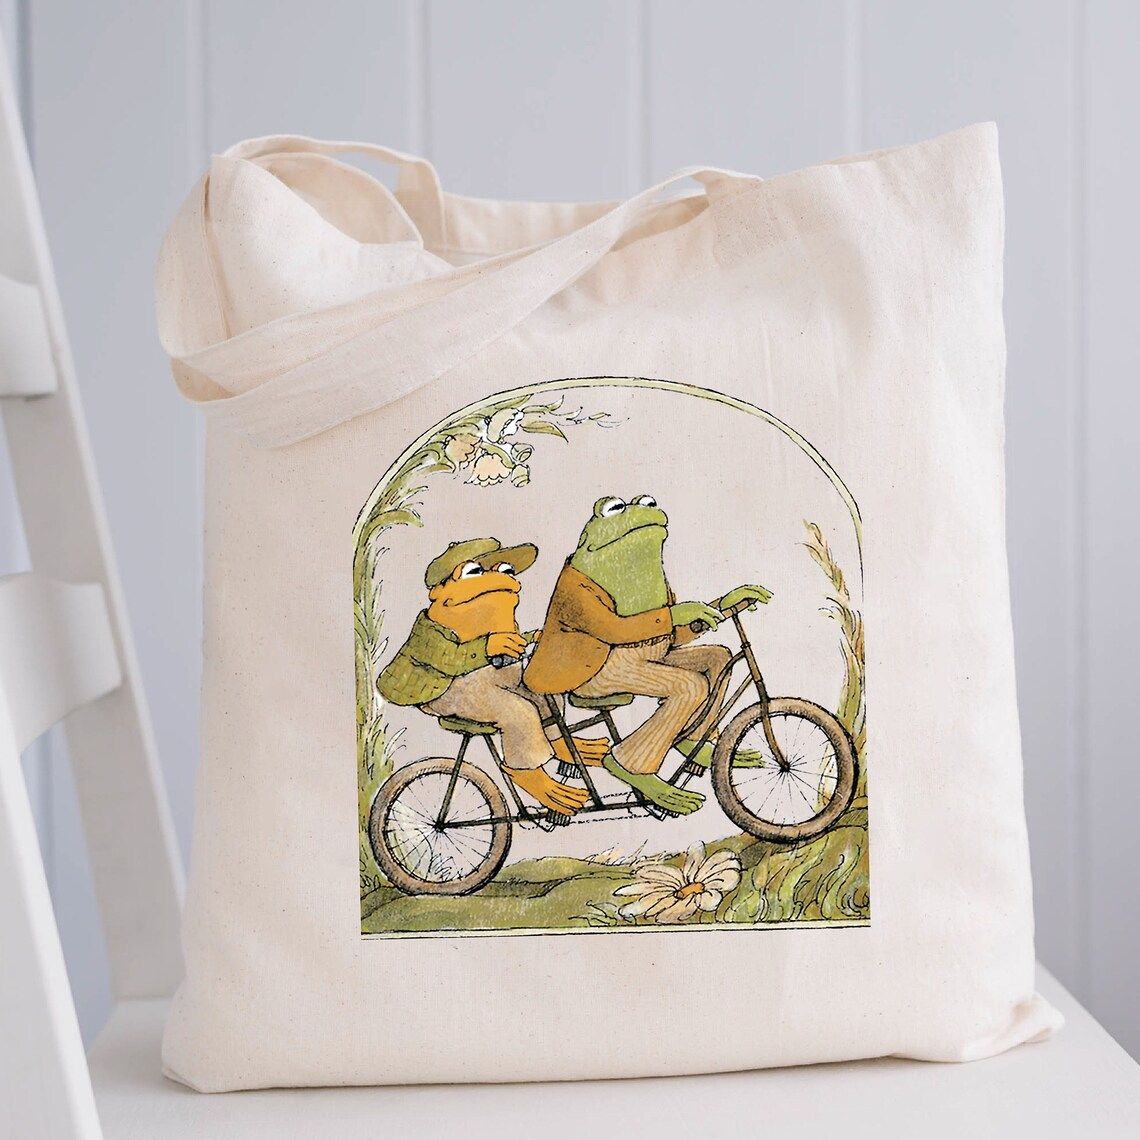 Image of a canvas tote on a white chair. The tote bag has an image from the classic Frog and Toad books